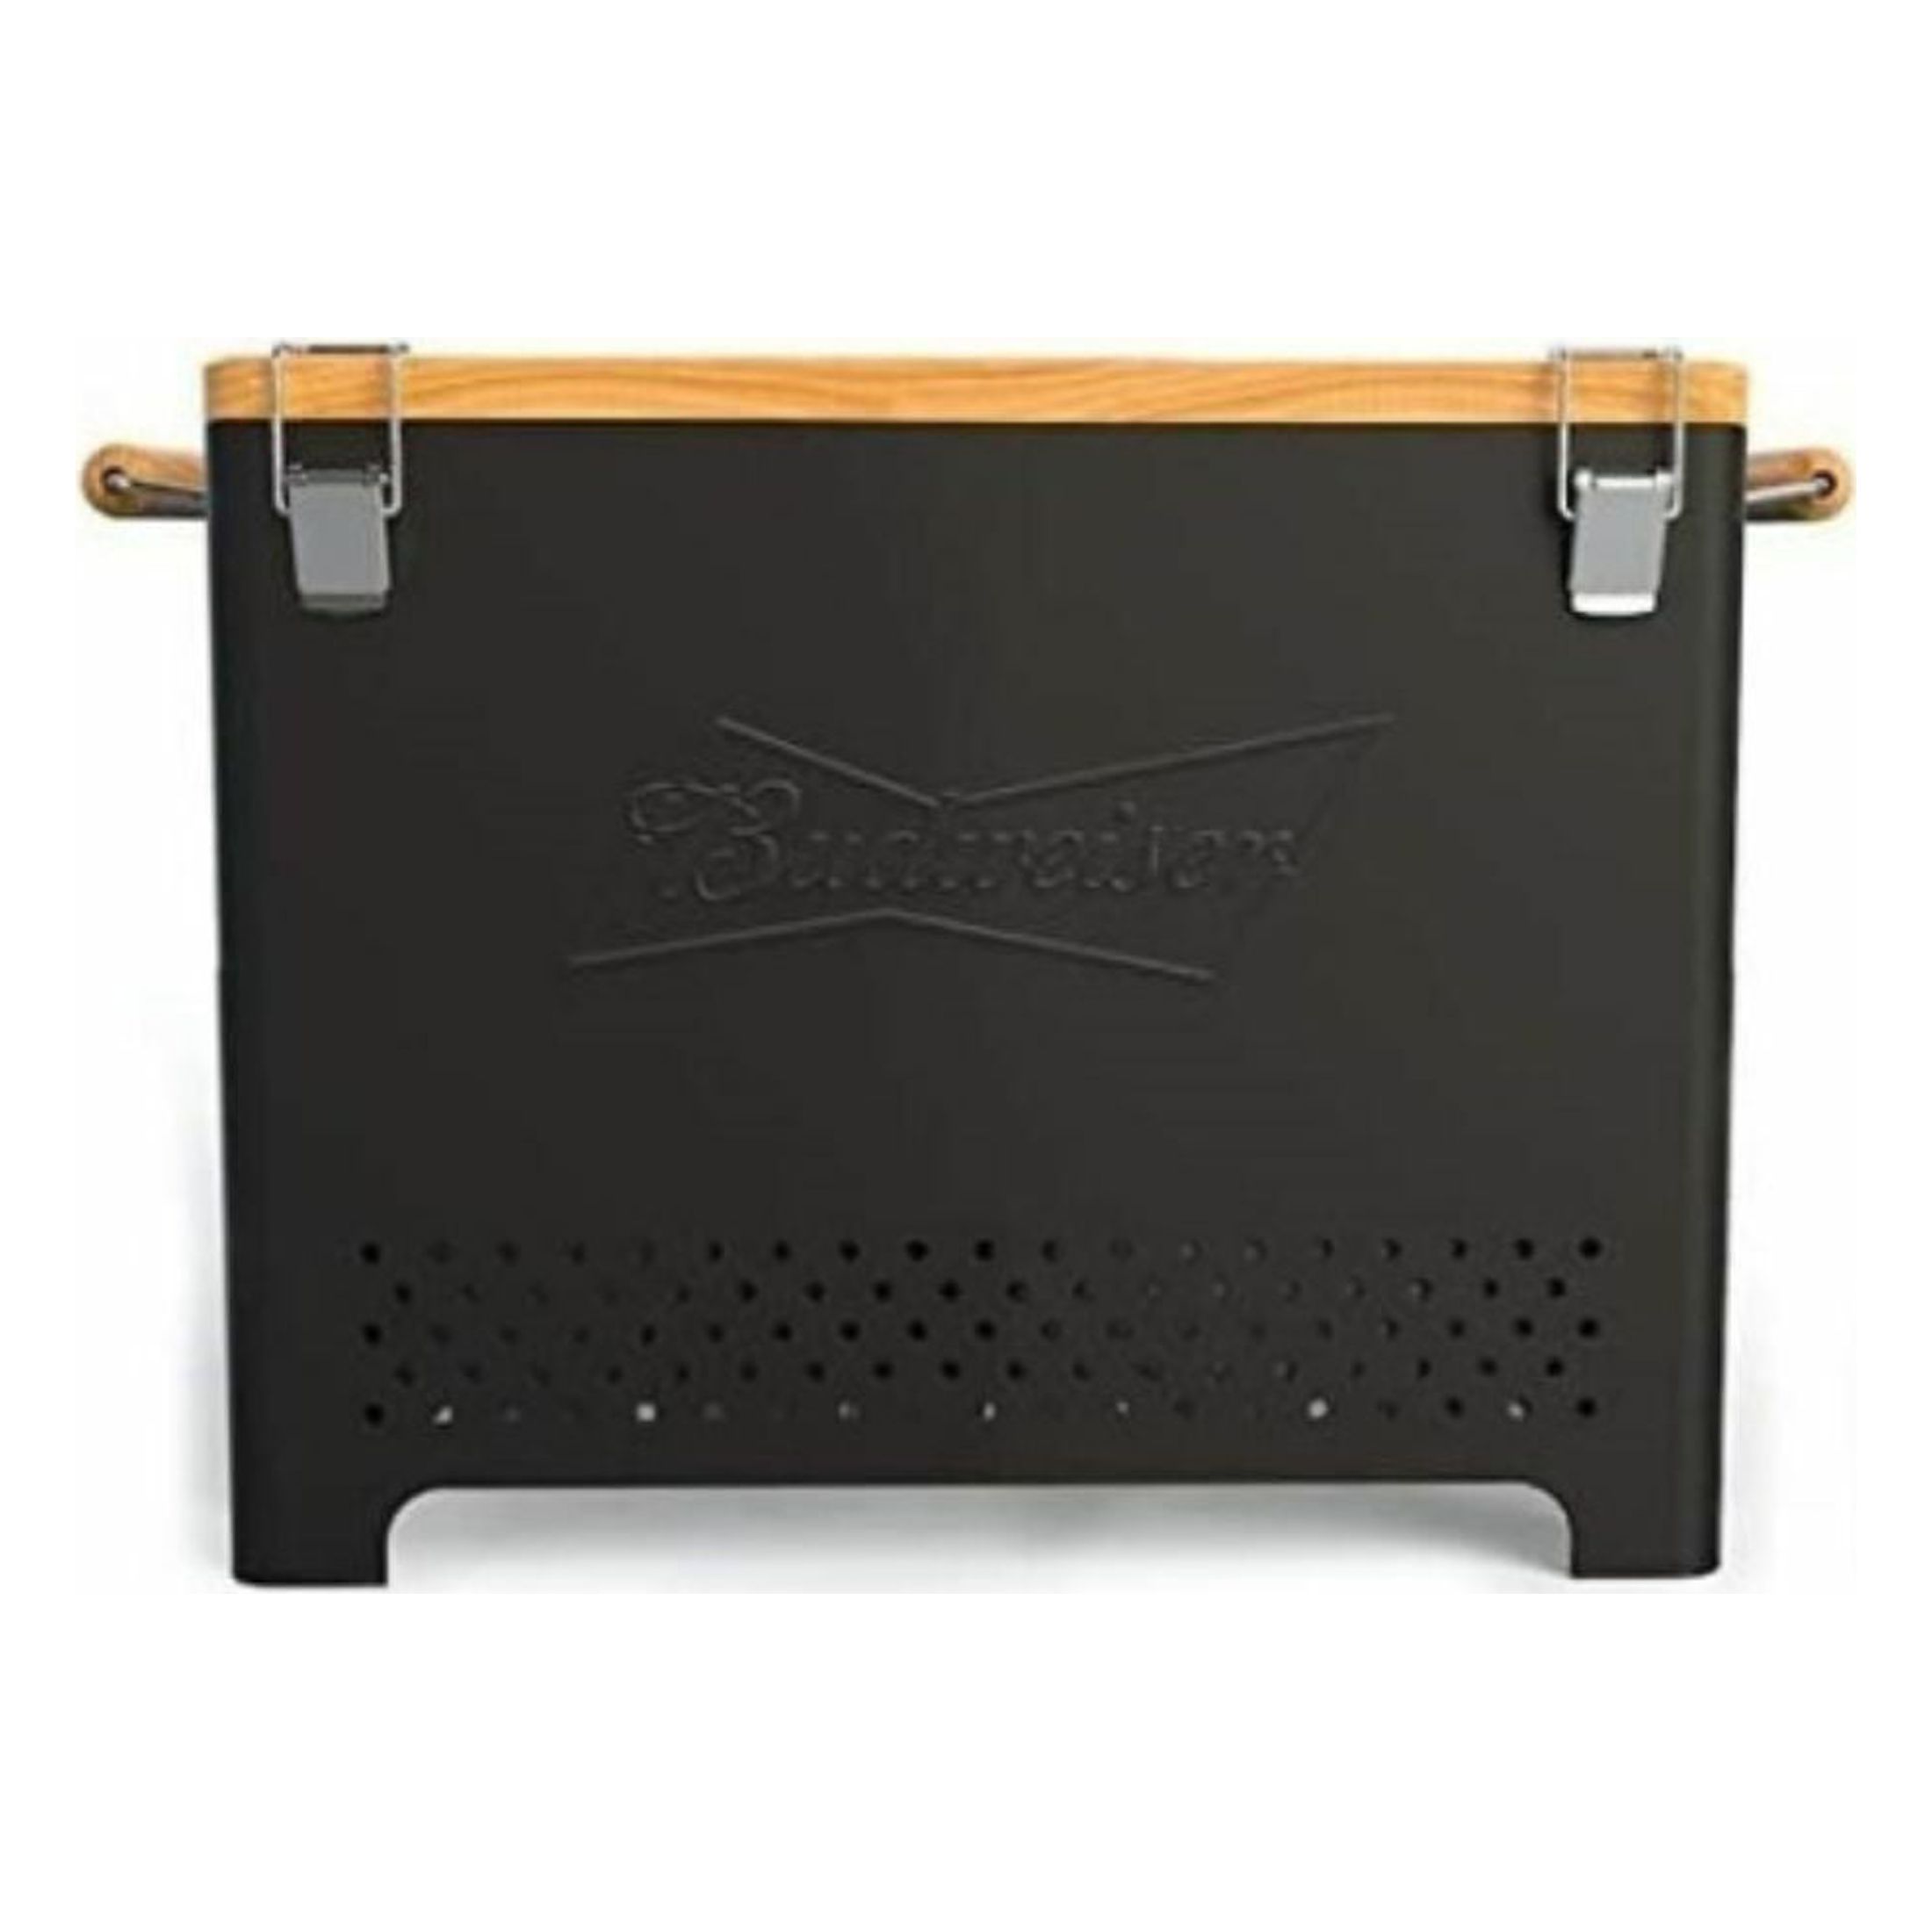 Budweiser Barbeque Charcoal Small Grill Set with Cutting Board - Black - image 3 of 3